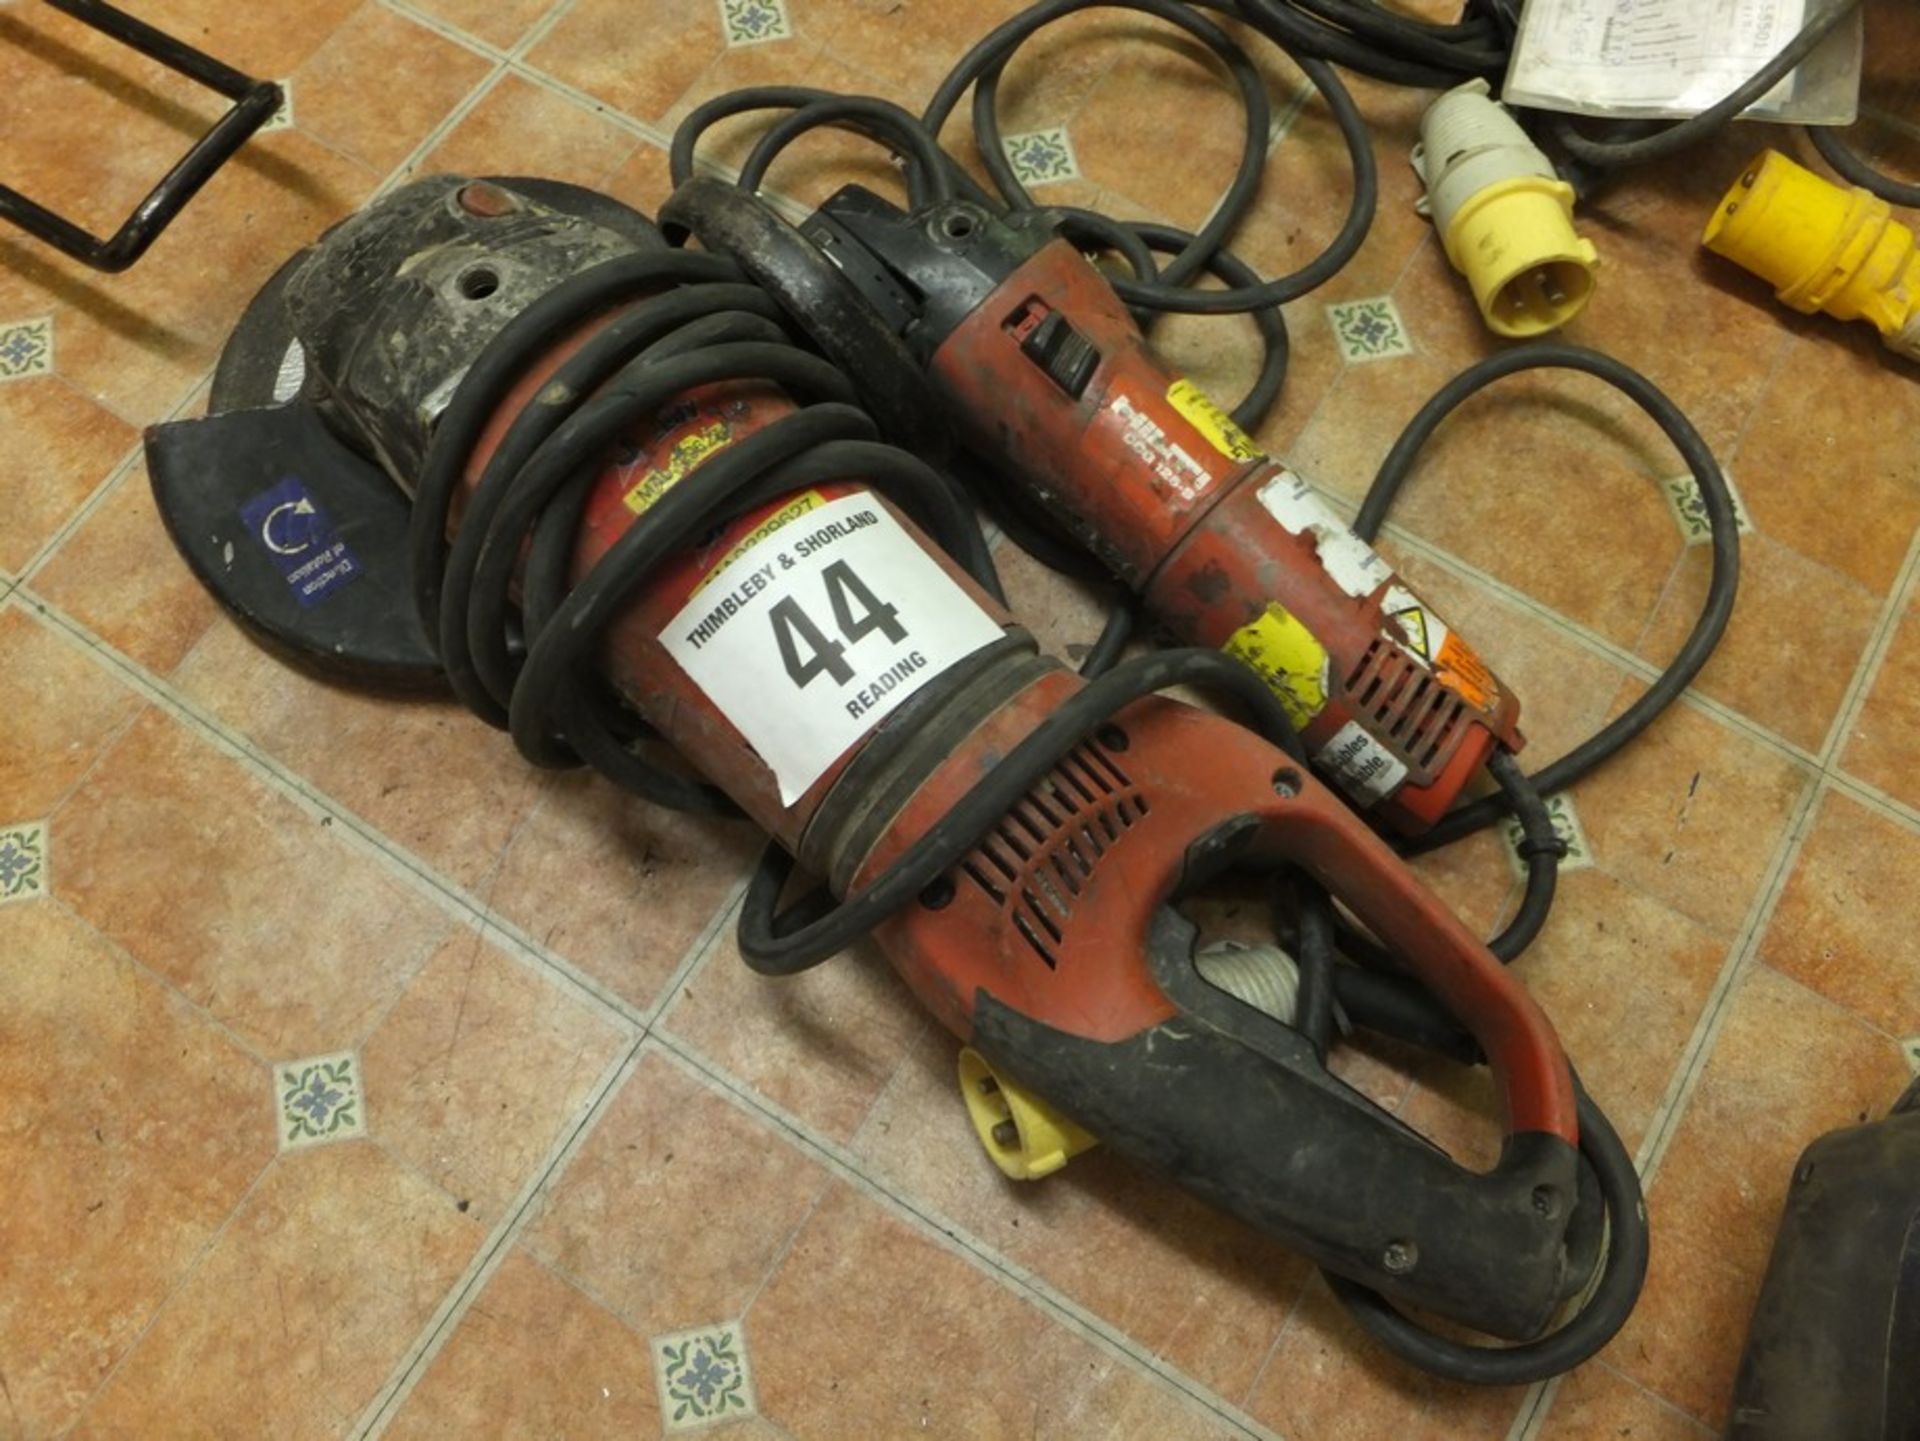 Hilti DCG125S & 9in angle grinders